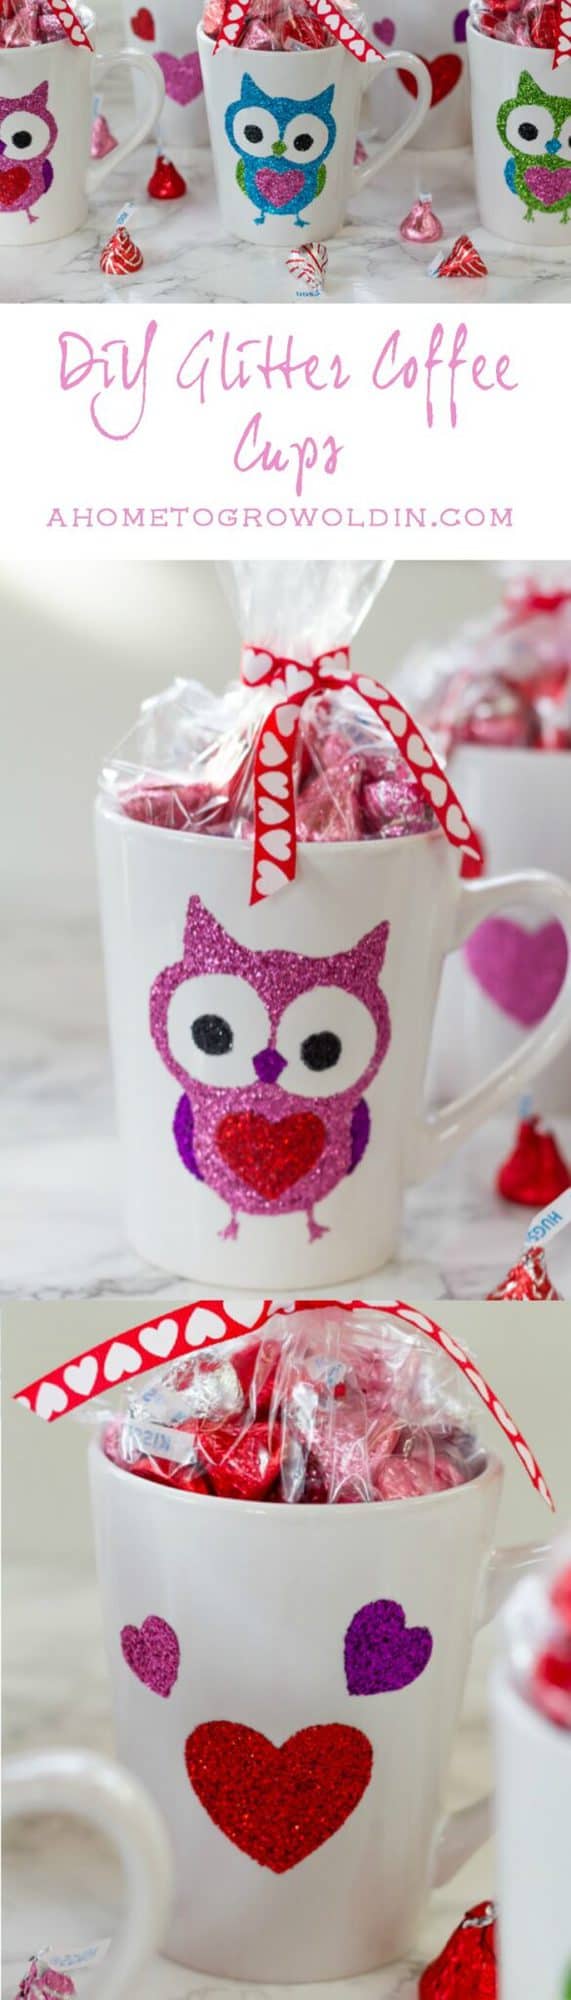 How cute are these glitter coffee cups? They are perfect for teacher or co-worker gifts! I would love to receive one of these mugs! Includes the Silhouette cut file as a free download. 